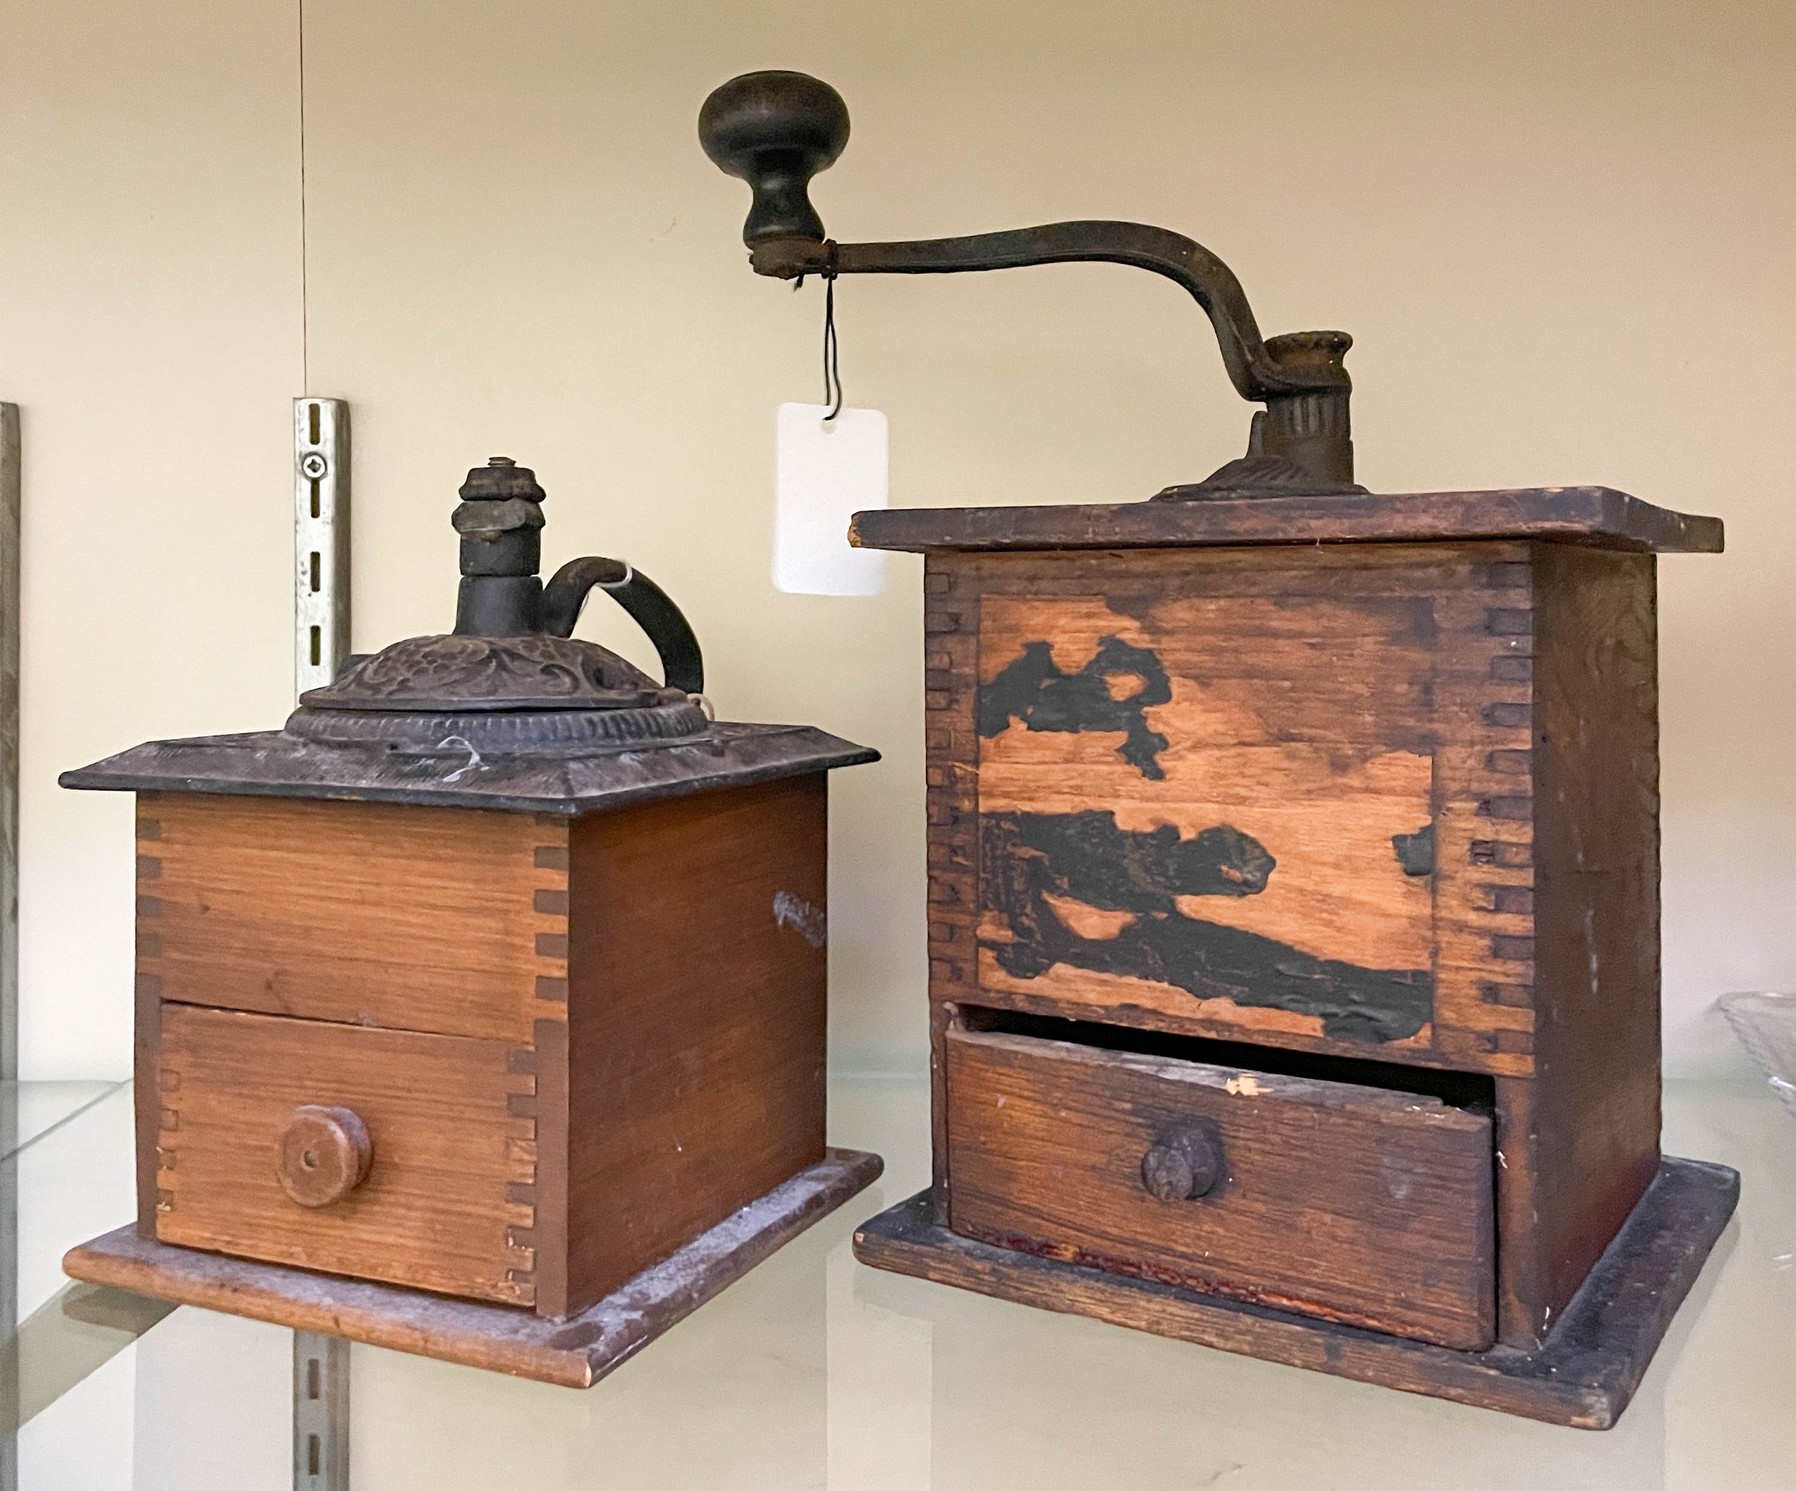 (2) Coffee grinders, dovetailed,